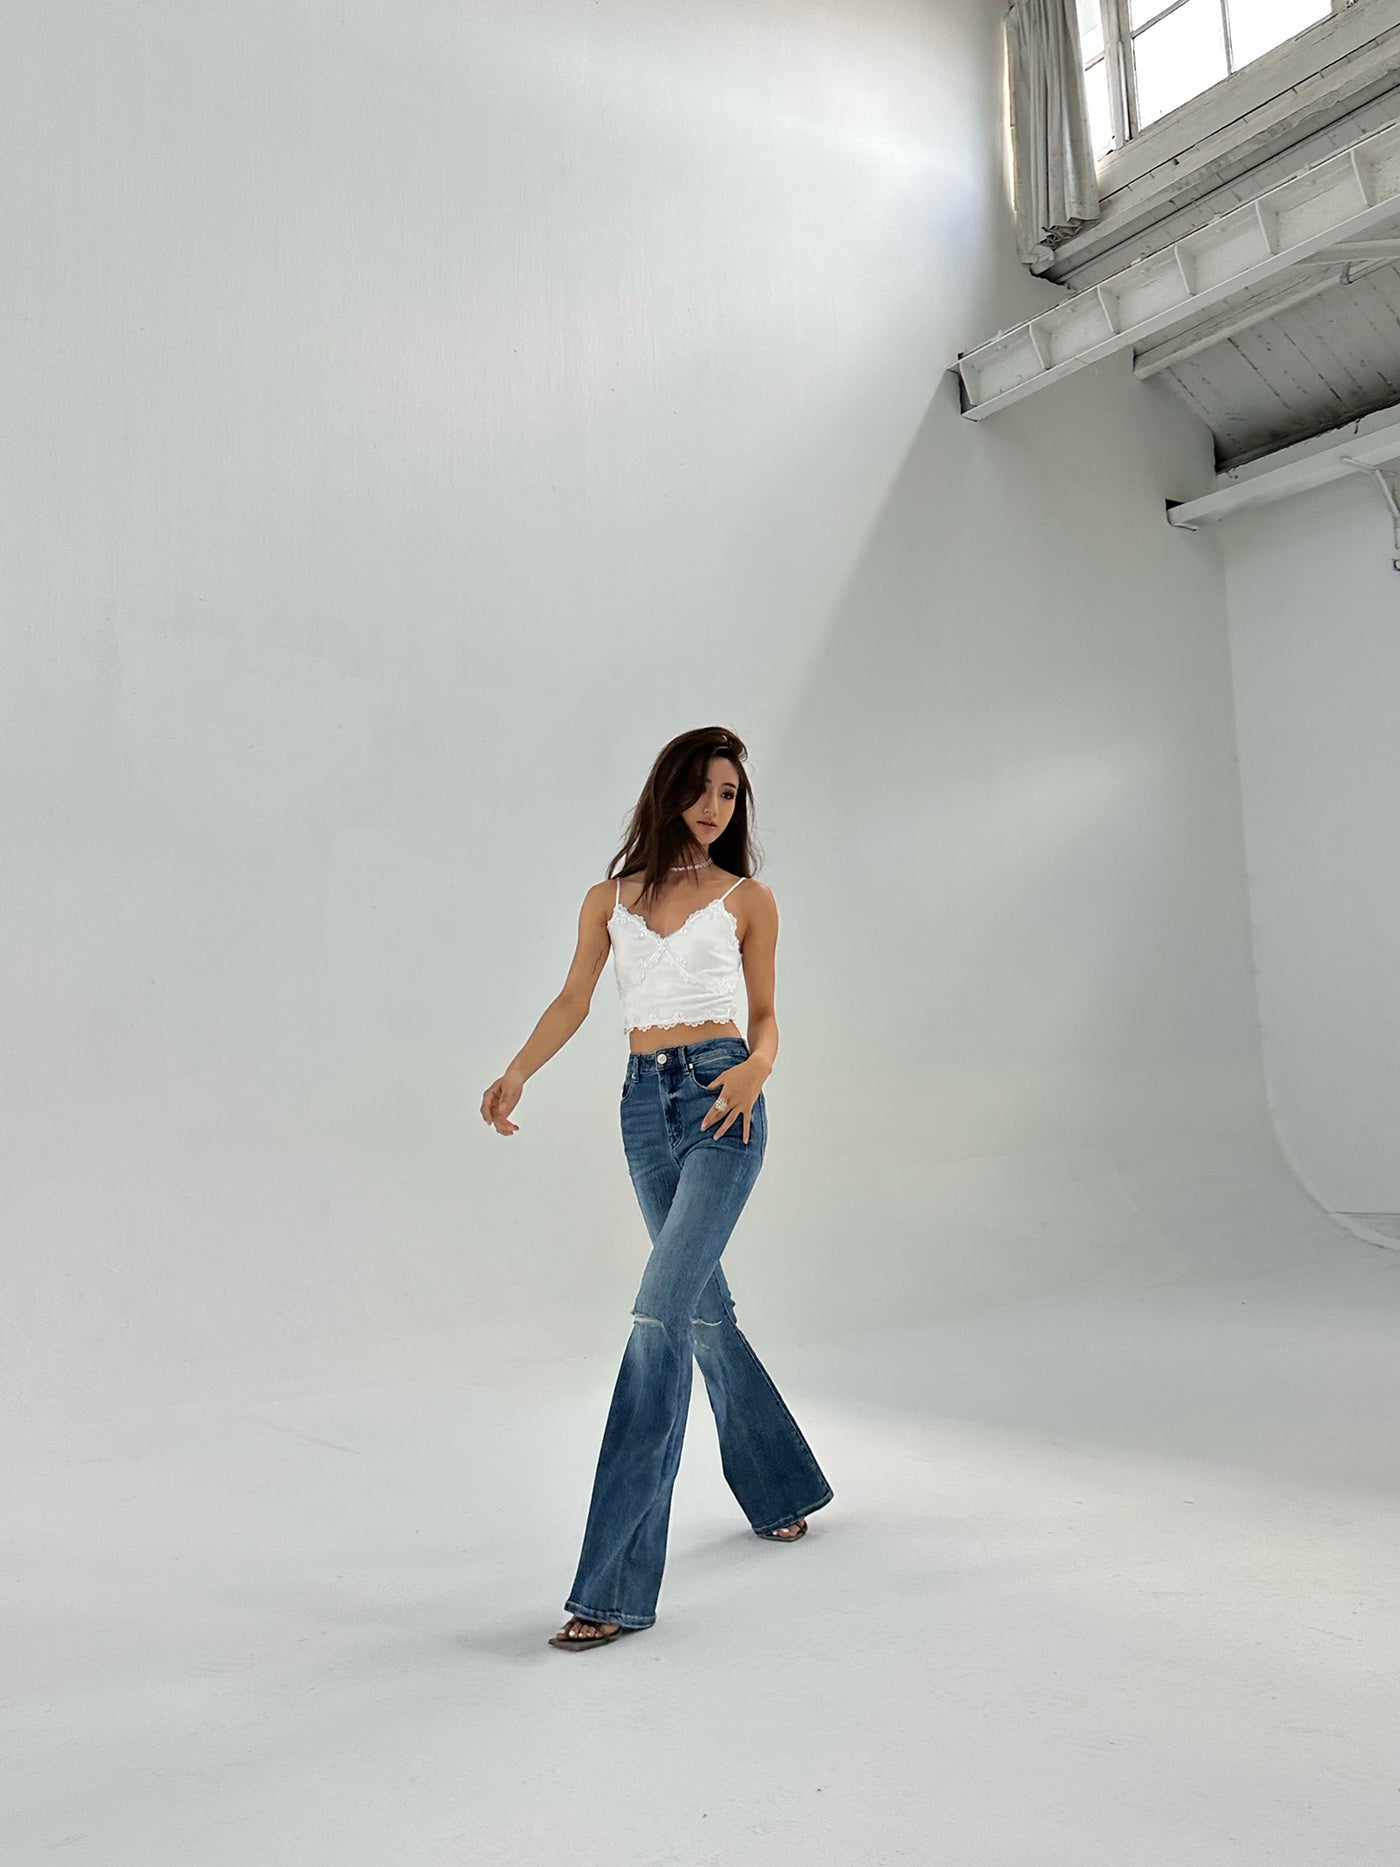 Blue High-waist Slim Loose Ripped Micro-flared Jeans SNT0018